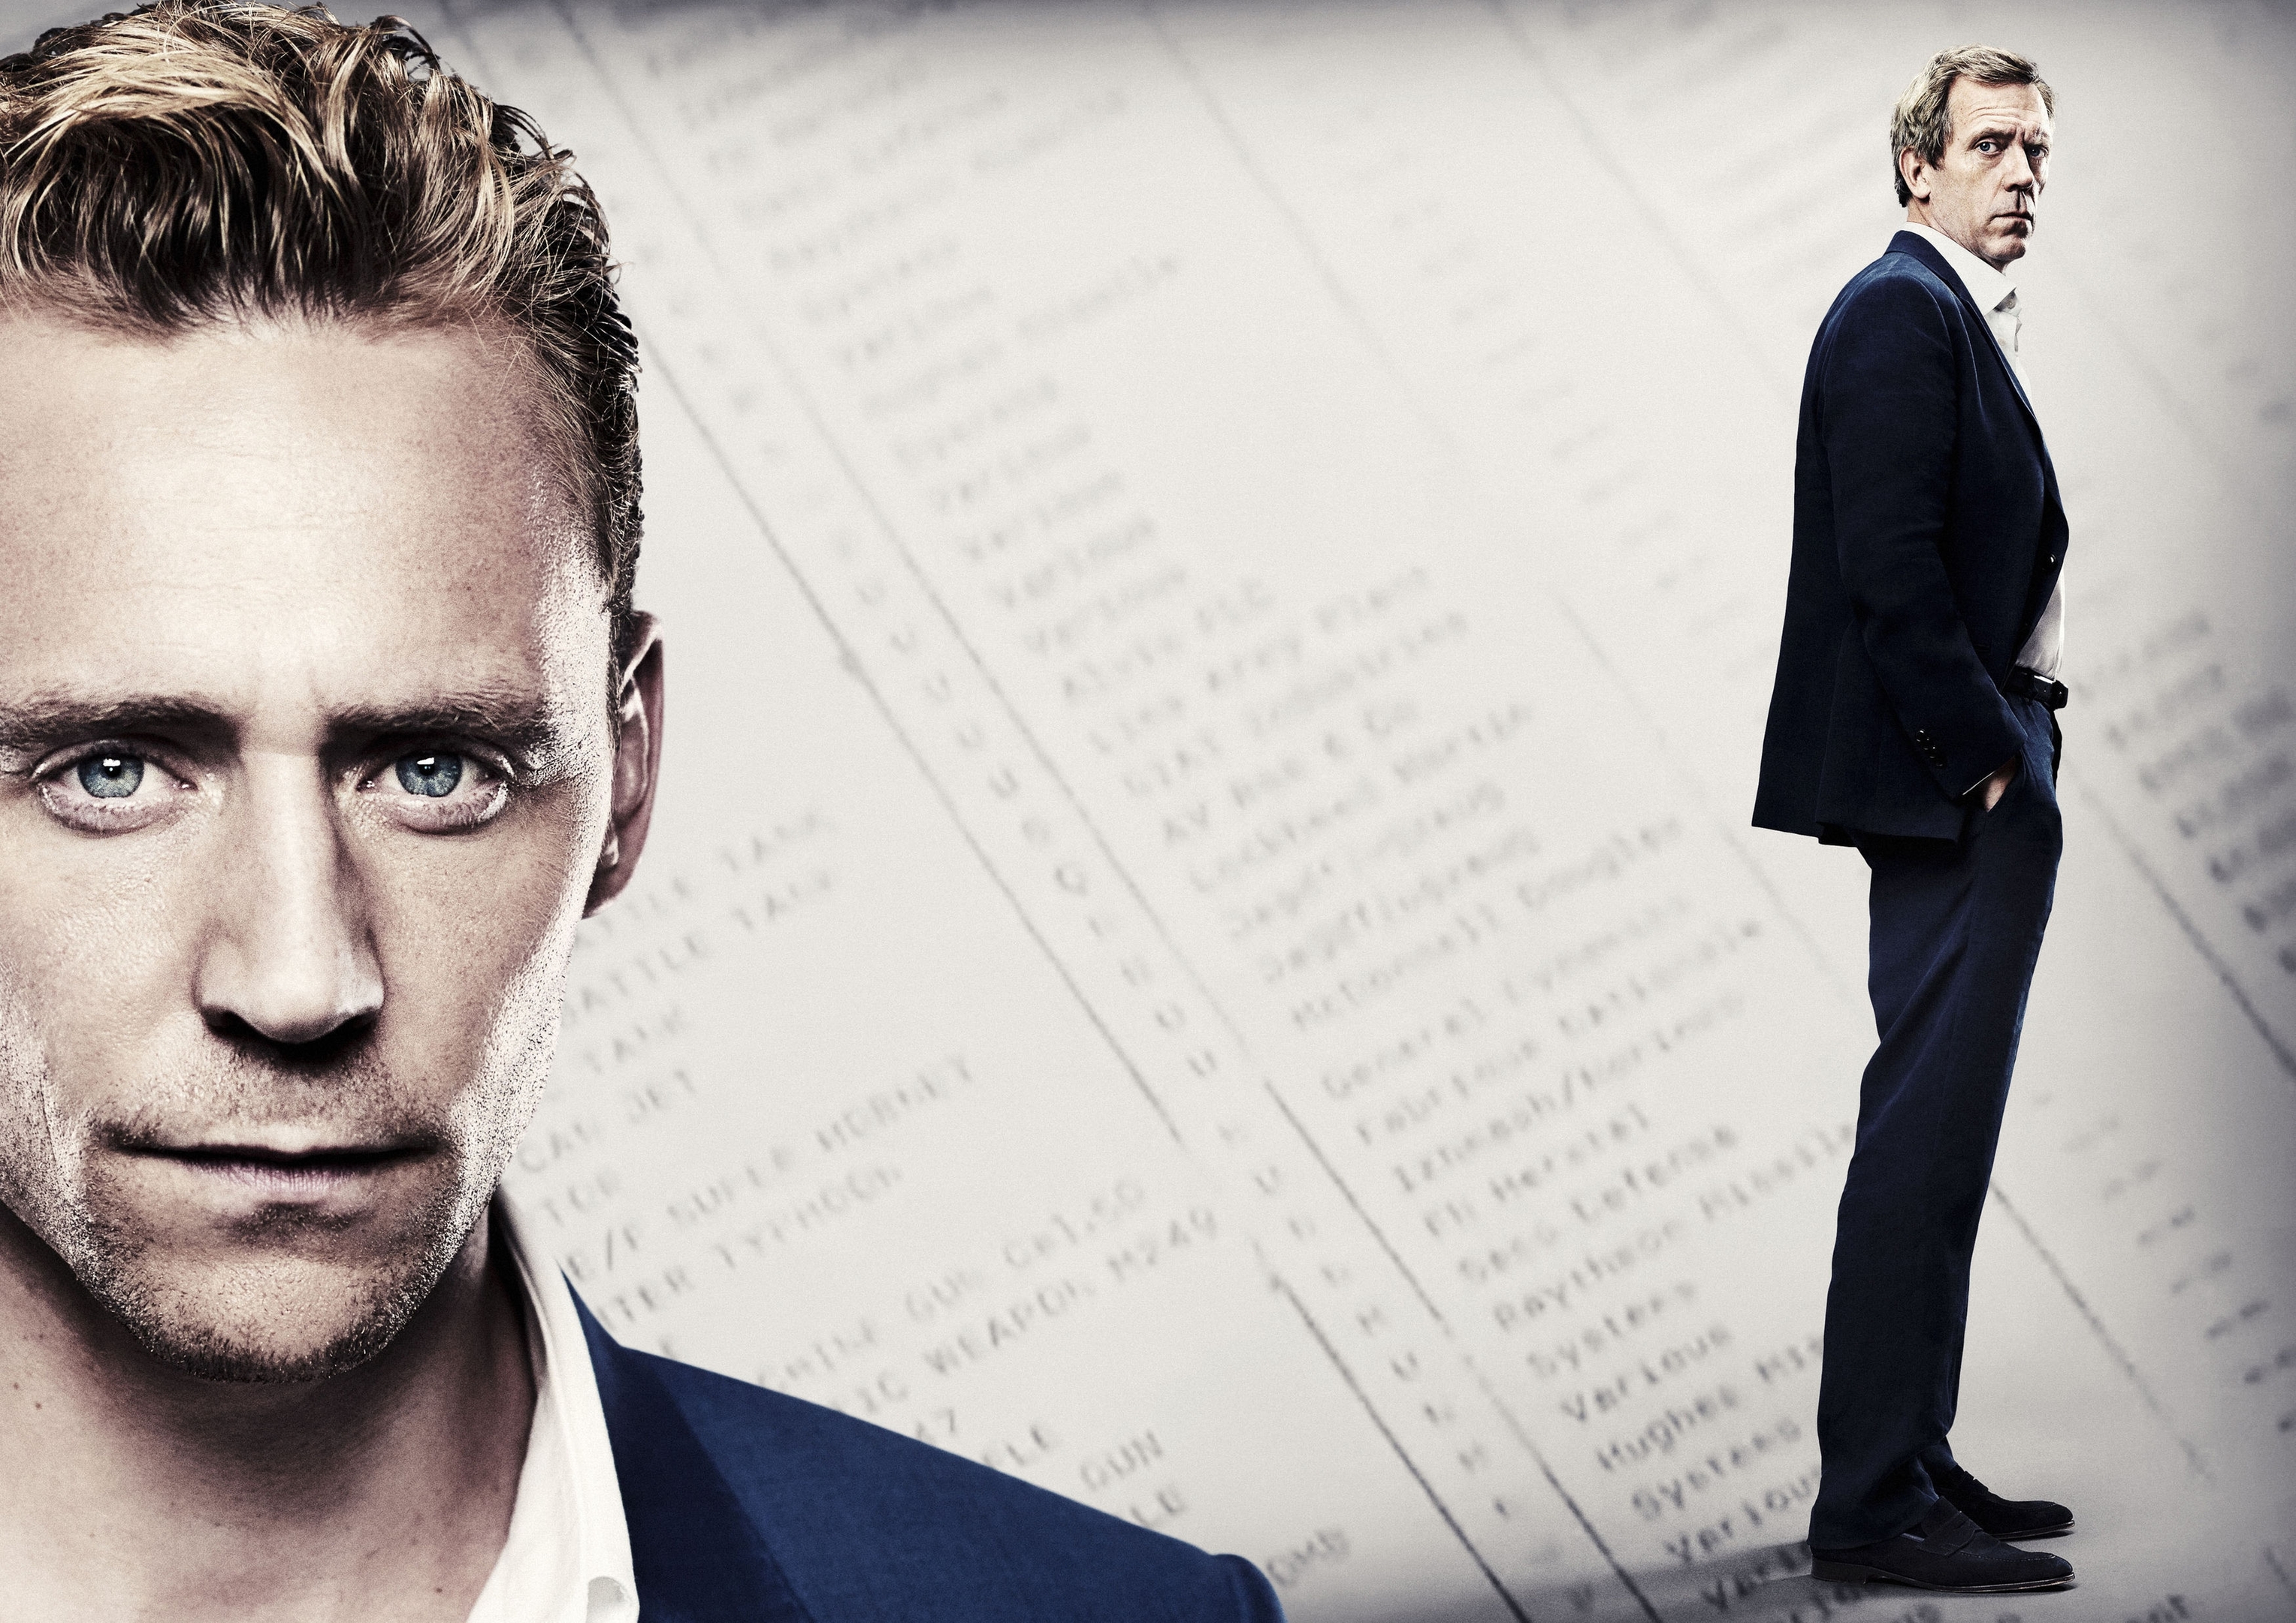 The Night Manager starred Hugh Lawrie and Tom Hiddleston